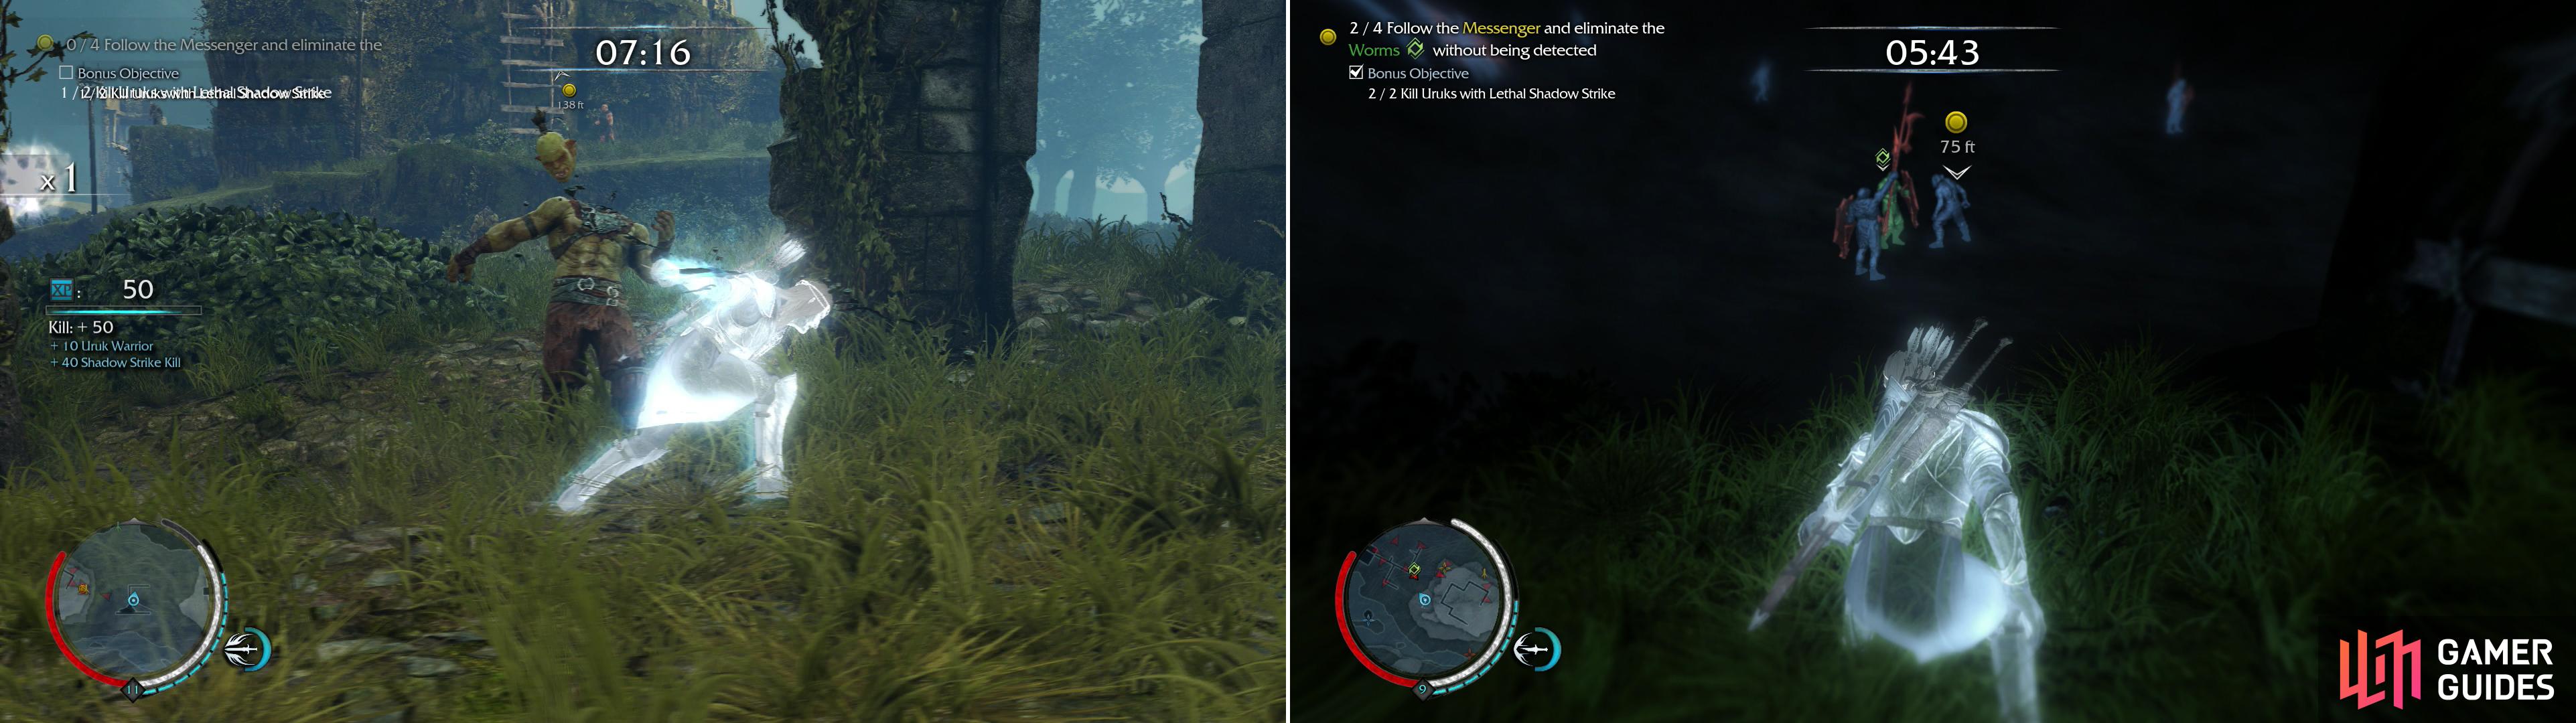 Shadow Strike will allow you to traverse distances instantly and quickly eliminate foes (left). The Messenger will gossip to various Uruks as he travels, turning them into Worms who must be exterminated (right).